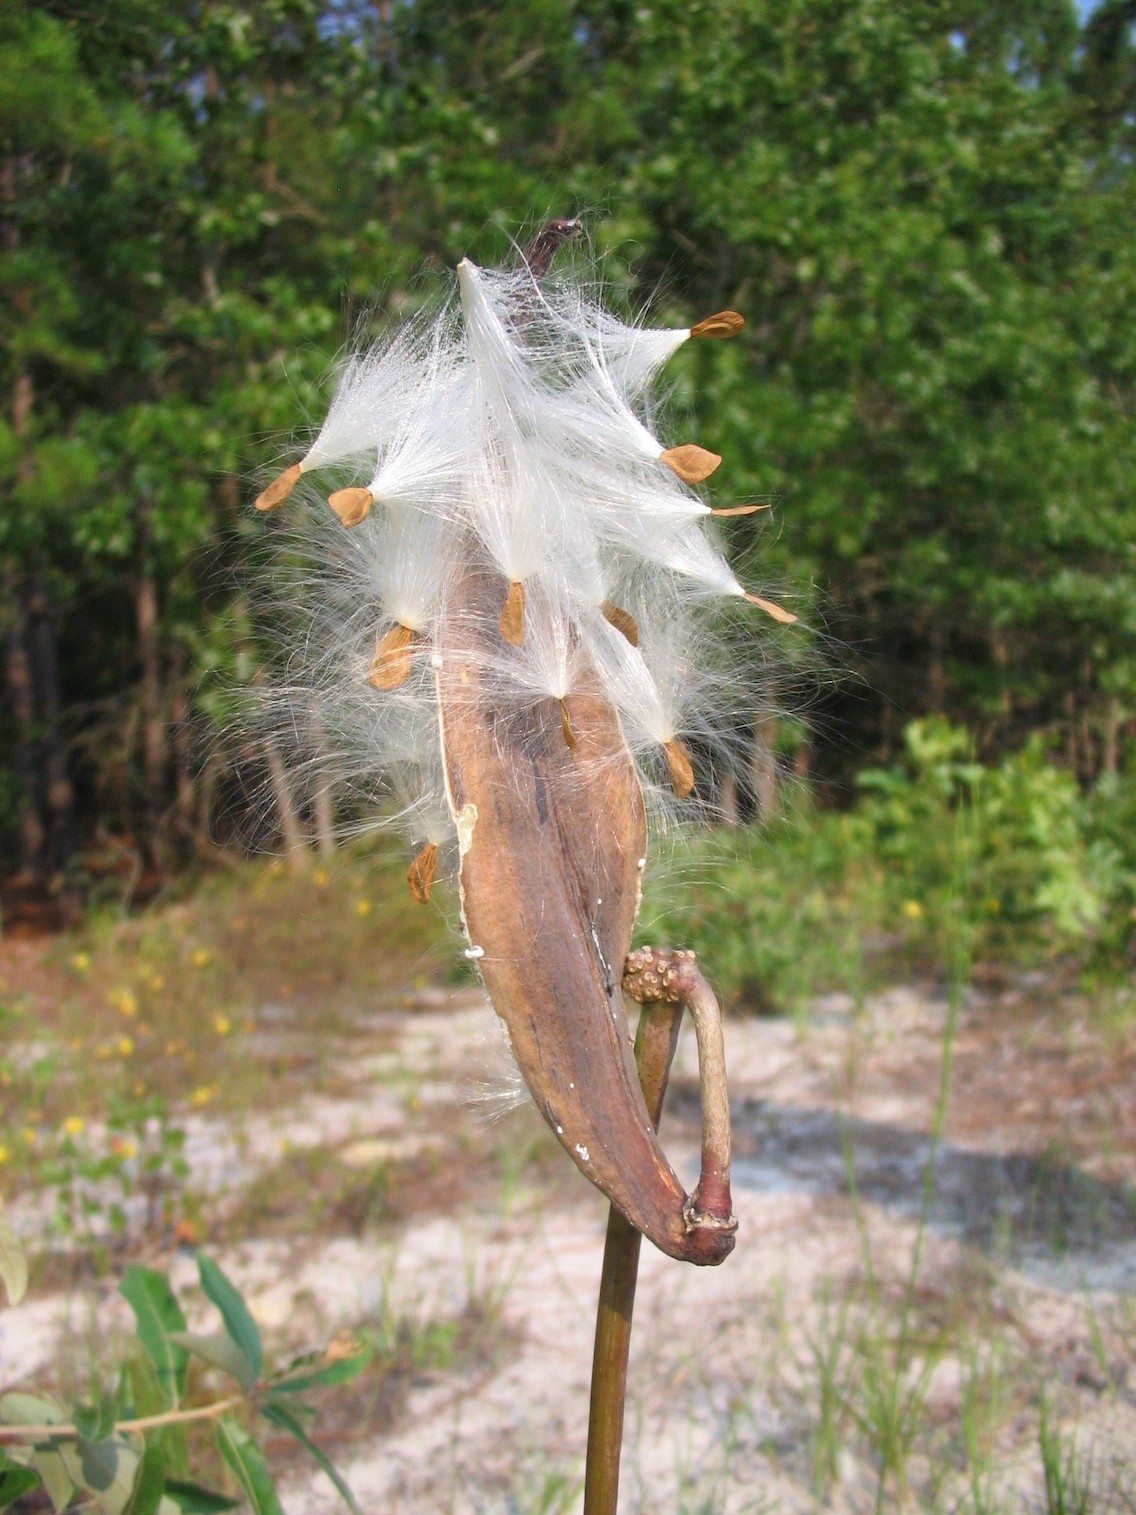 The Scientific Name is Asclepias amplexicaulis. You will likely hear them called Clasping Milkweed, Sand Milkweed, Bluntleaf Milkweed. This picture shows the Mature capsule releasing seeds of Asclepias amplexicaulis